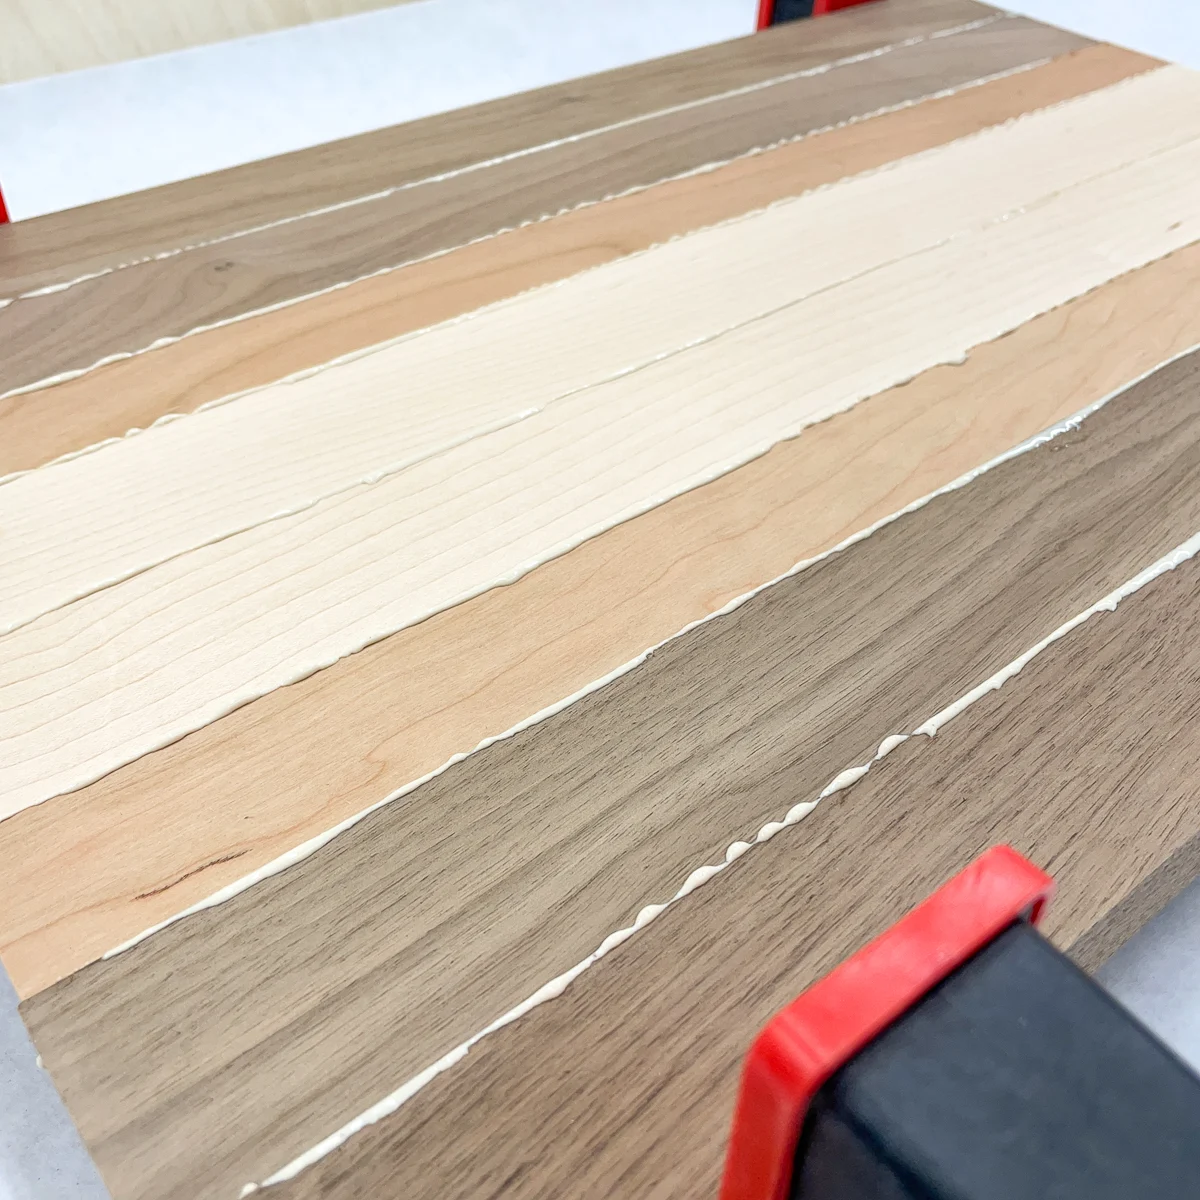 Wood Glue For Cutting Boards: Is It Safe?